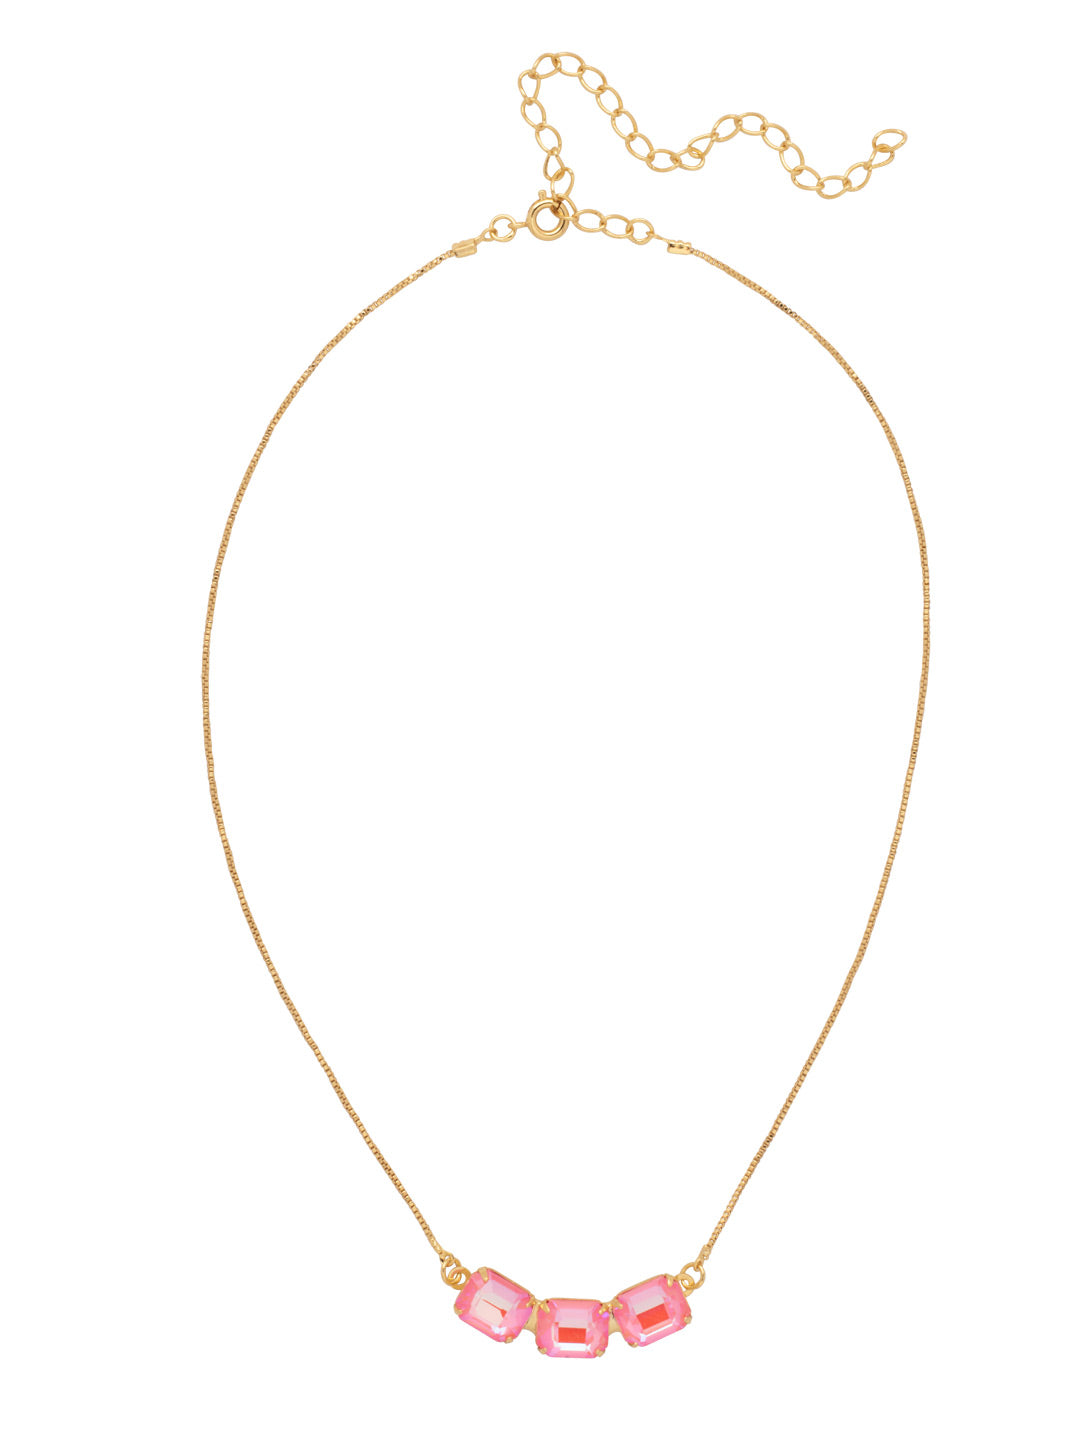 Octavia Triple Tennis Necklace - NFL15BGBFL - <p>The Octavia Triple Tennis Necklace features three emerald cut crystals on a dainty adjustable chain, secured by a spring ring clasp. From Sorrelli's Big Flirt collection in our Bright Gold-tone finish.</p>